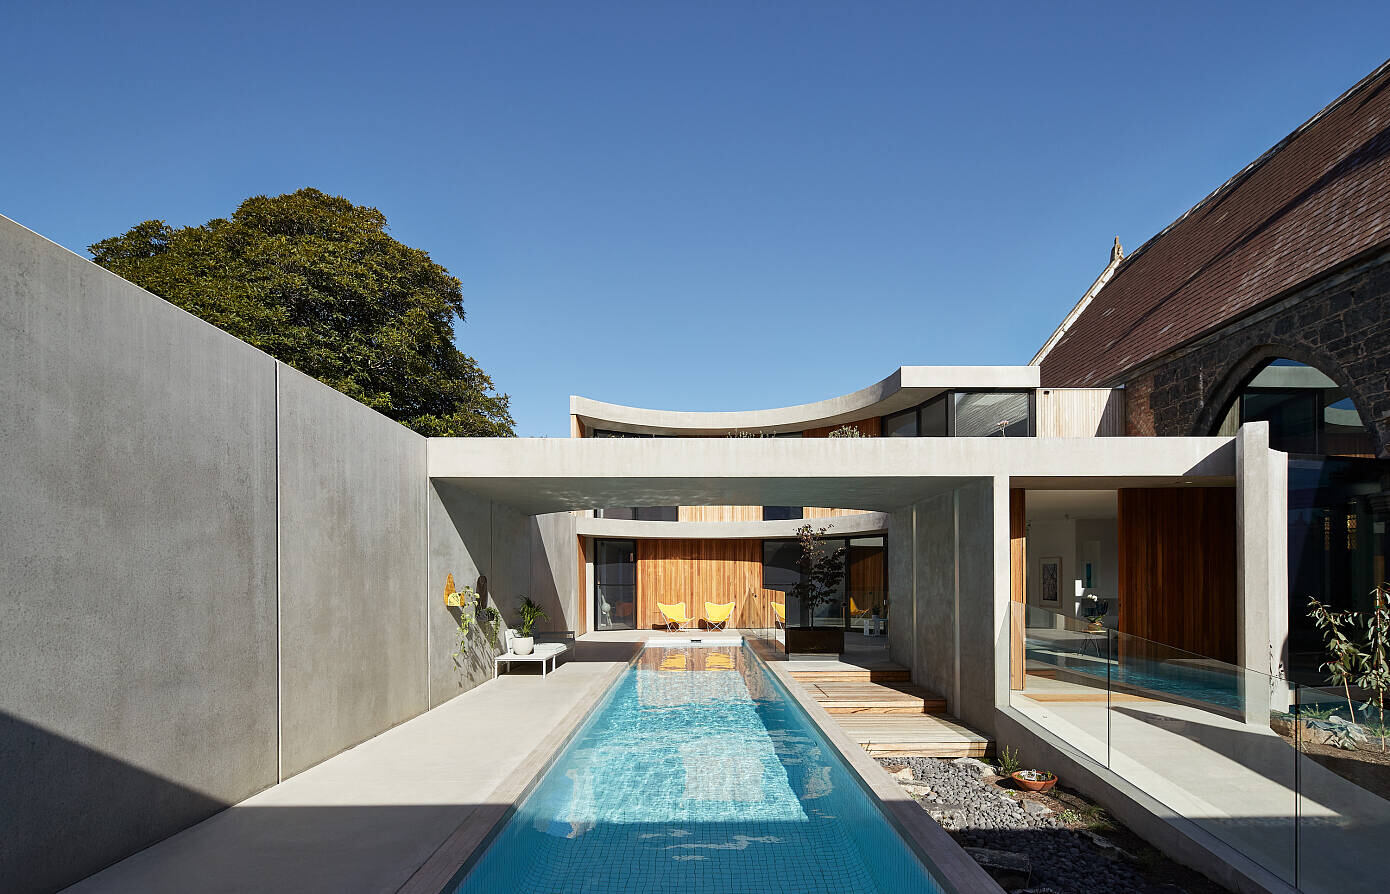 Courtyard House and Church by Kister Architects